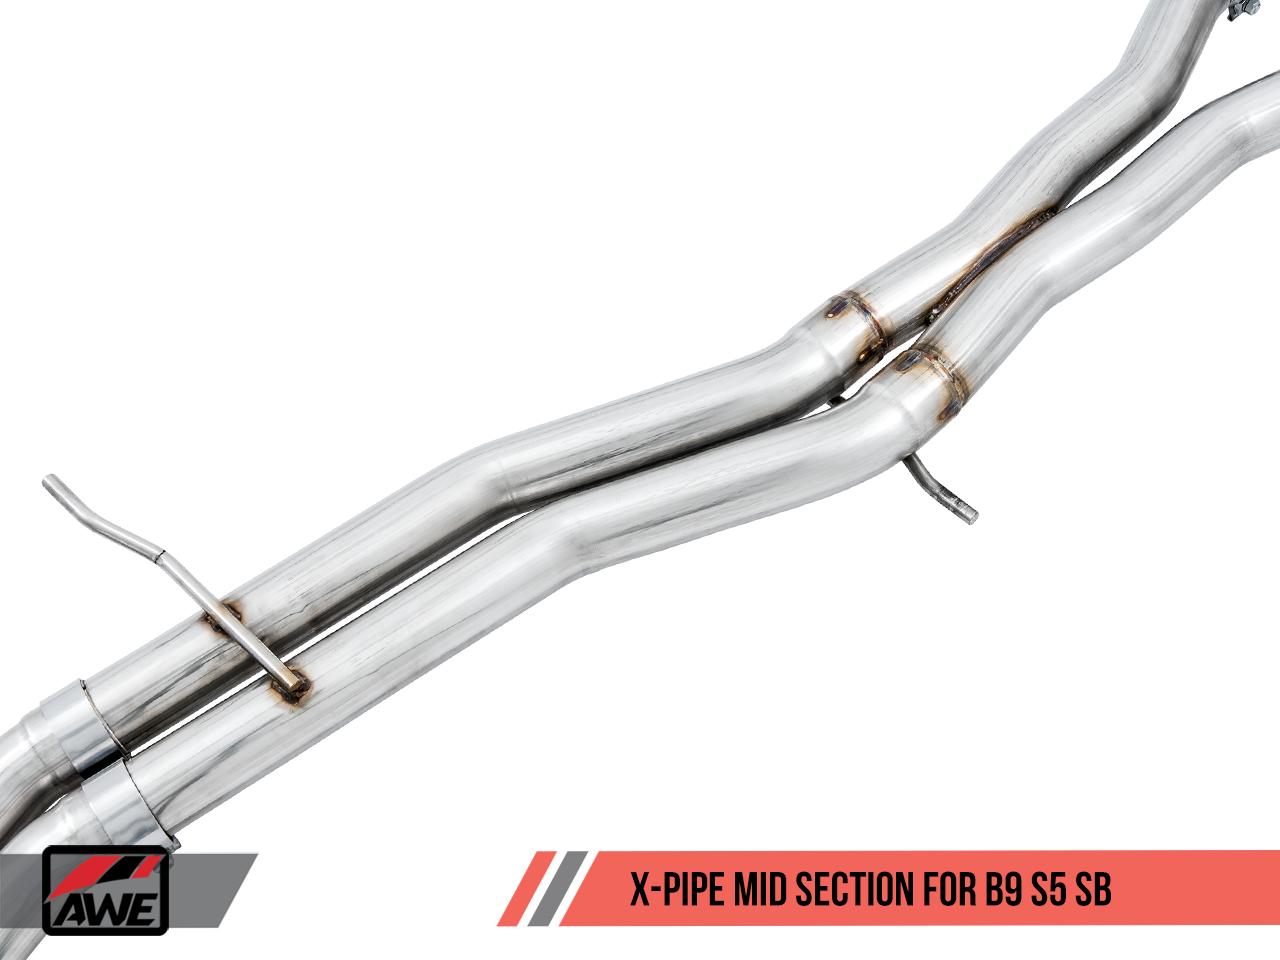 AWE Track Edition Exhaust for B9 S5 Sportback - Resonated for Performance Catalyst - Motorsports LA